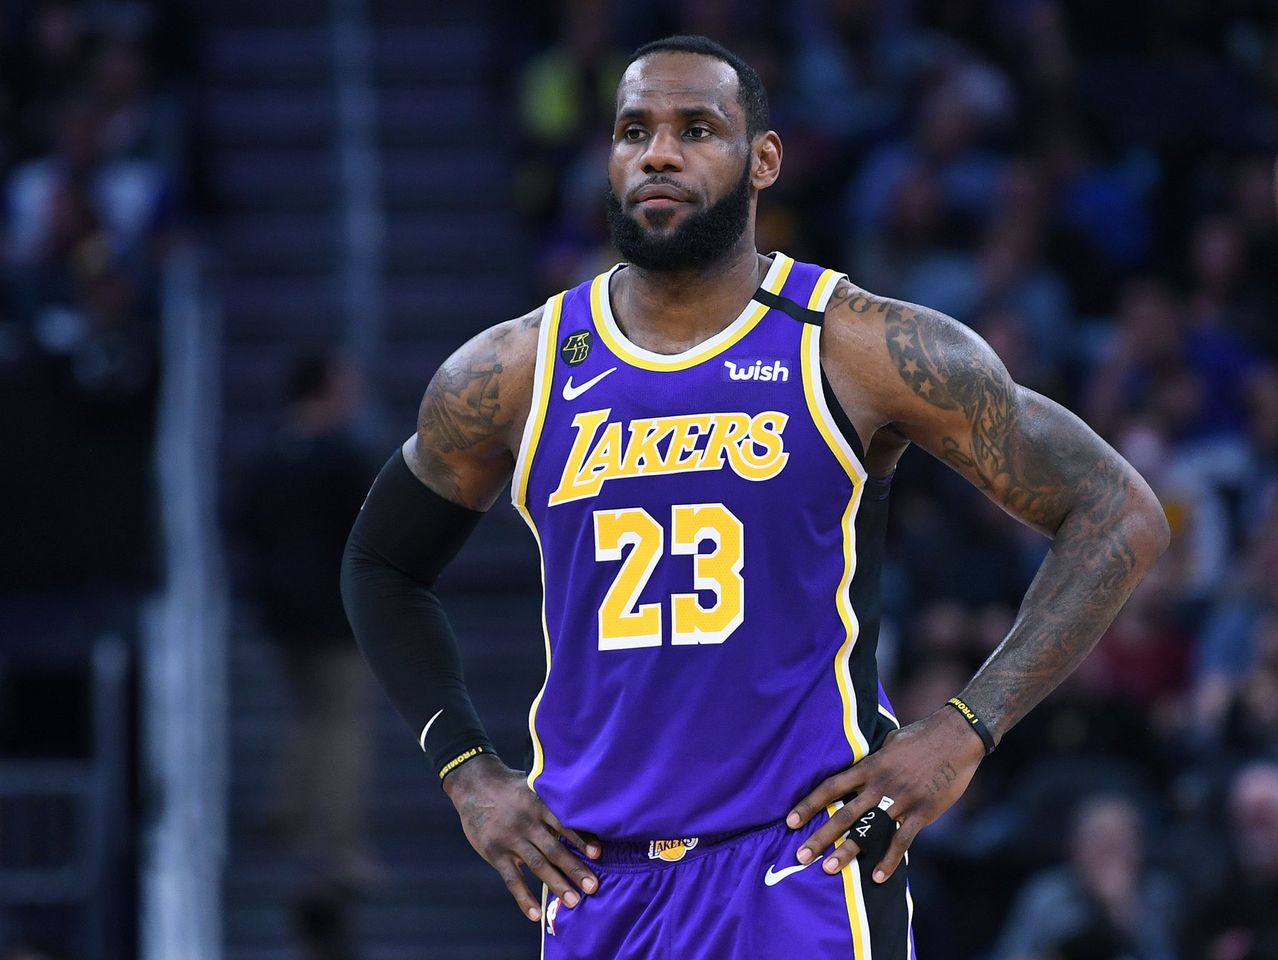 LeBron James, #23 of the Los Angeles Lakers, looks on against the Golden State Warriors during an NBA basketball game on February 08, 2020 | Photo: Getty Images